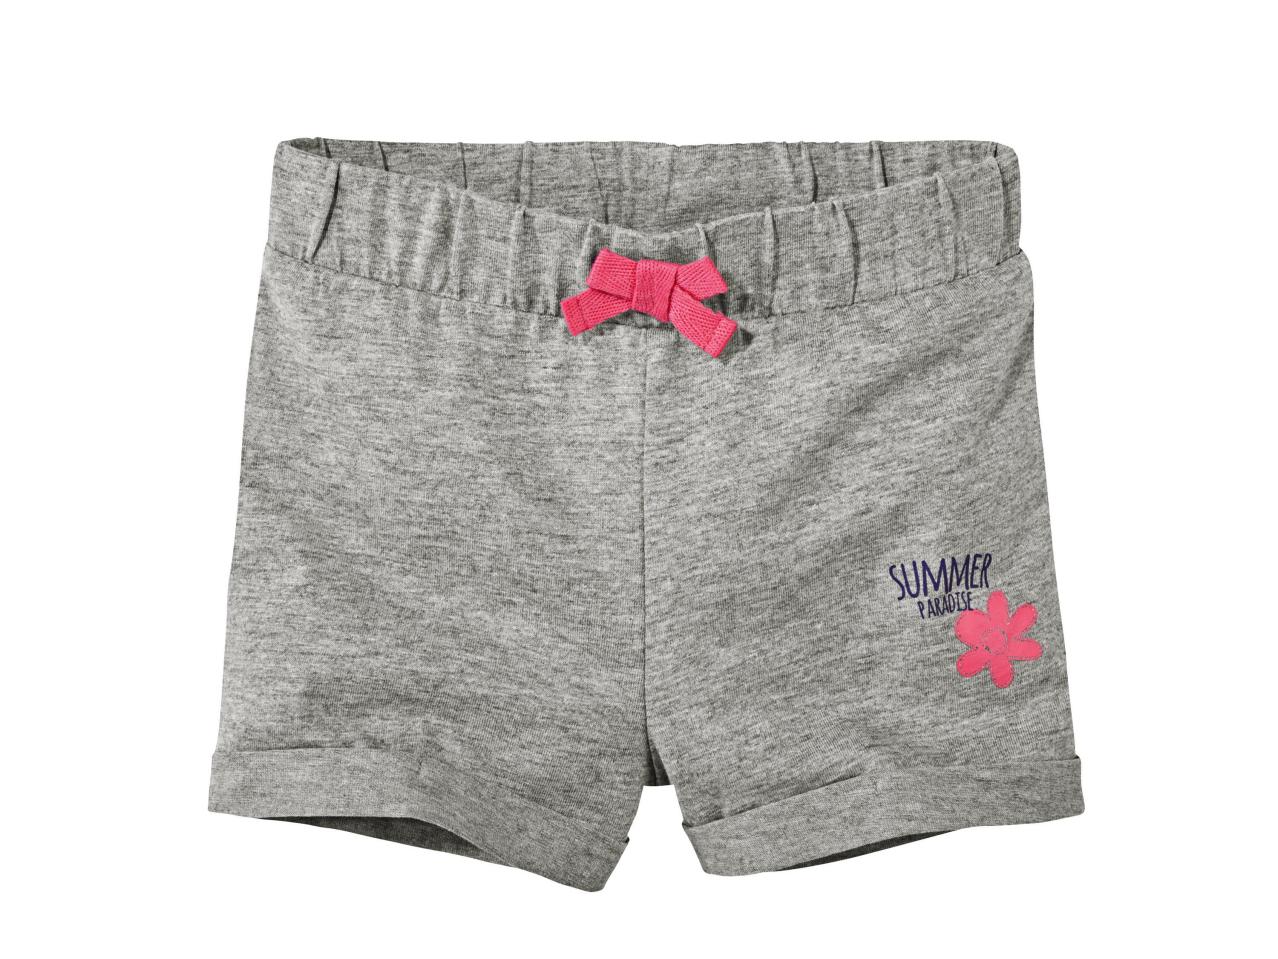 Girls' Shorts, 2 pieces